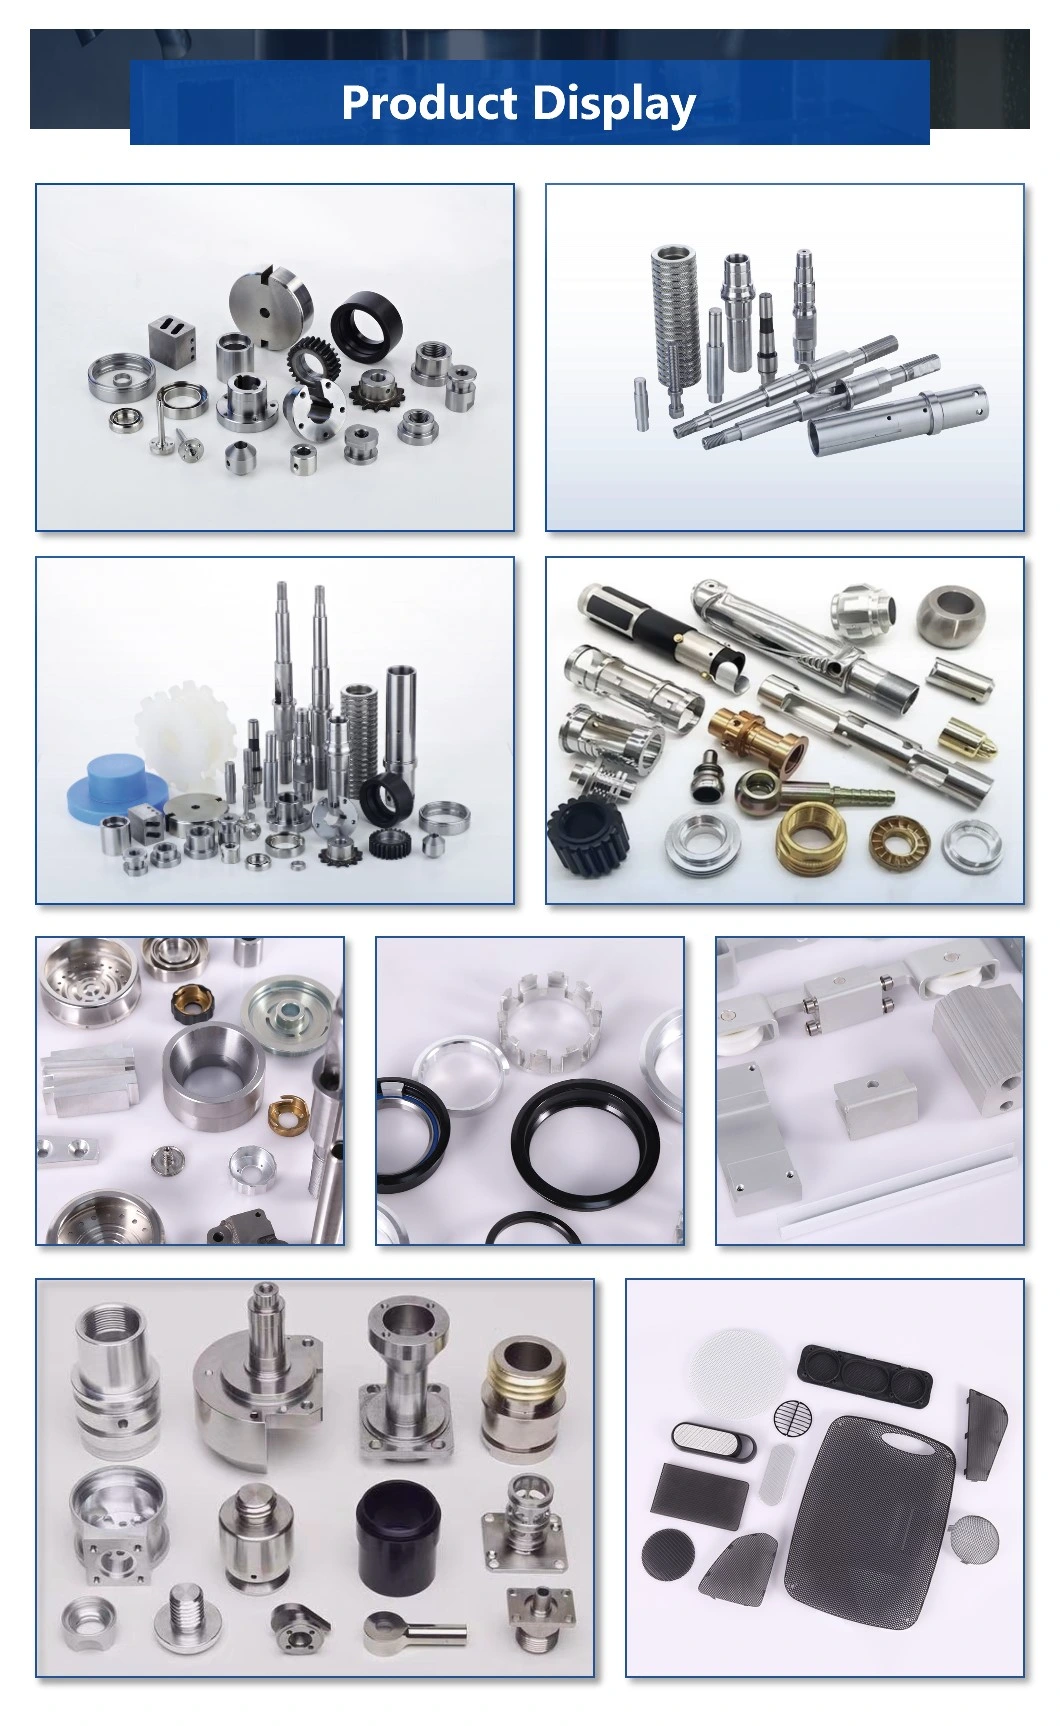 OEM Aluminum/Brass/Copper/Stainless Steel/Iron/Titanium Alloy/Plastic CNC Machining (Turning, Milling, Drilling, Tapping, Grinding) Parts for Inkjet/3D Printer